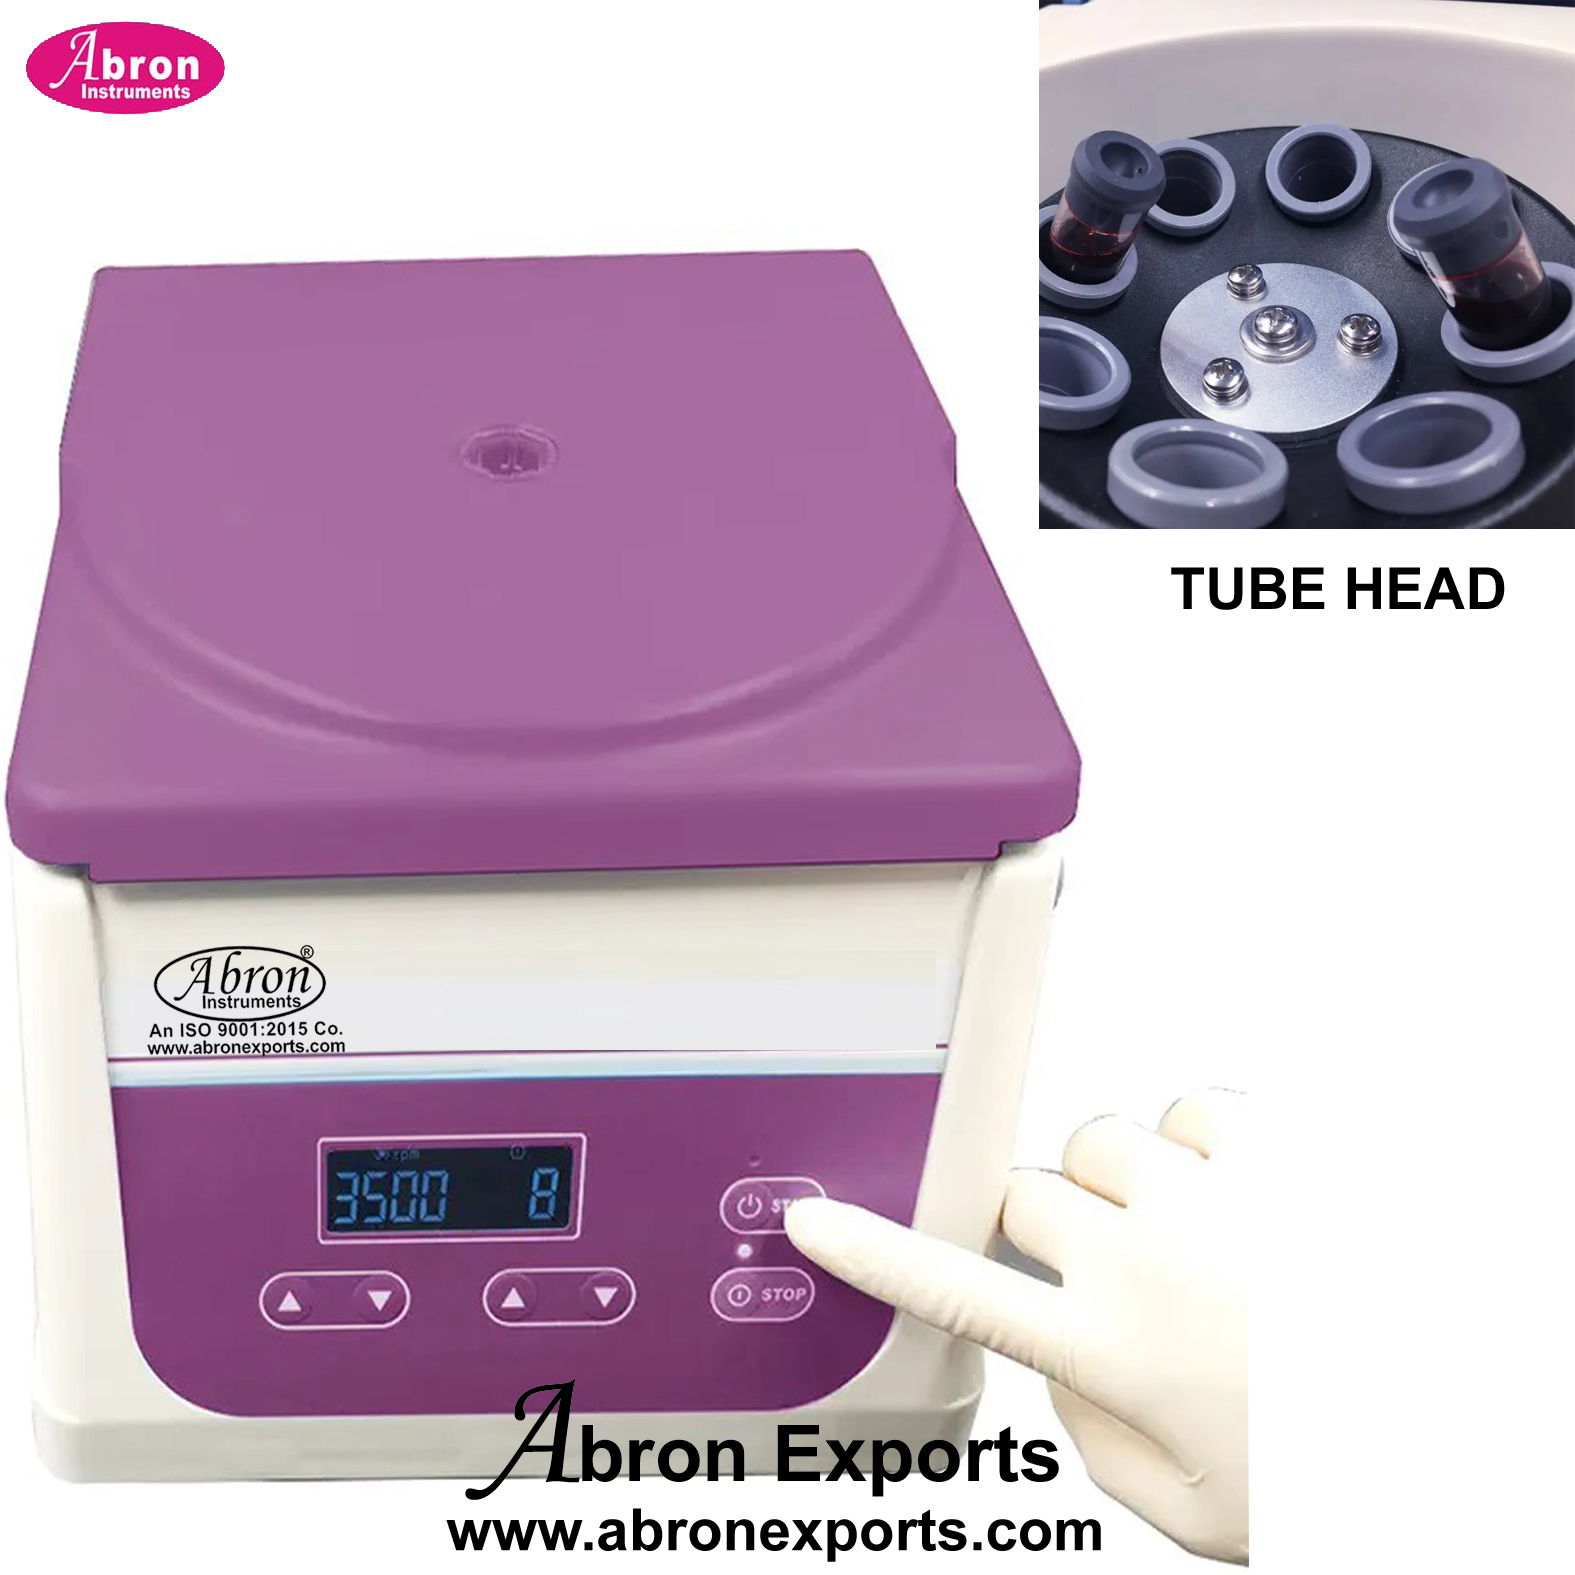 Centrifuge Blood Bank Plasma Seperator From Tube Digital 4000 RPM and Timer 8 Tubes Electric Special CH Abron ABM-2692CT8 